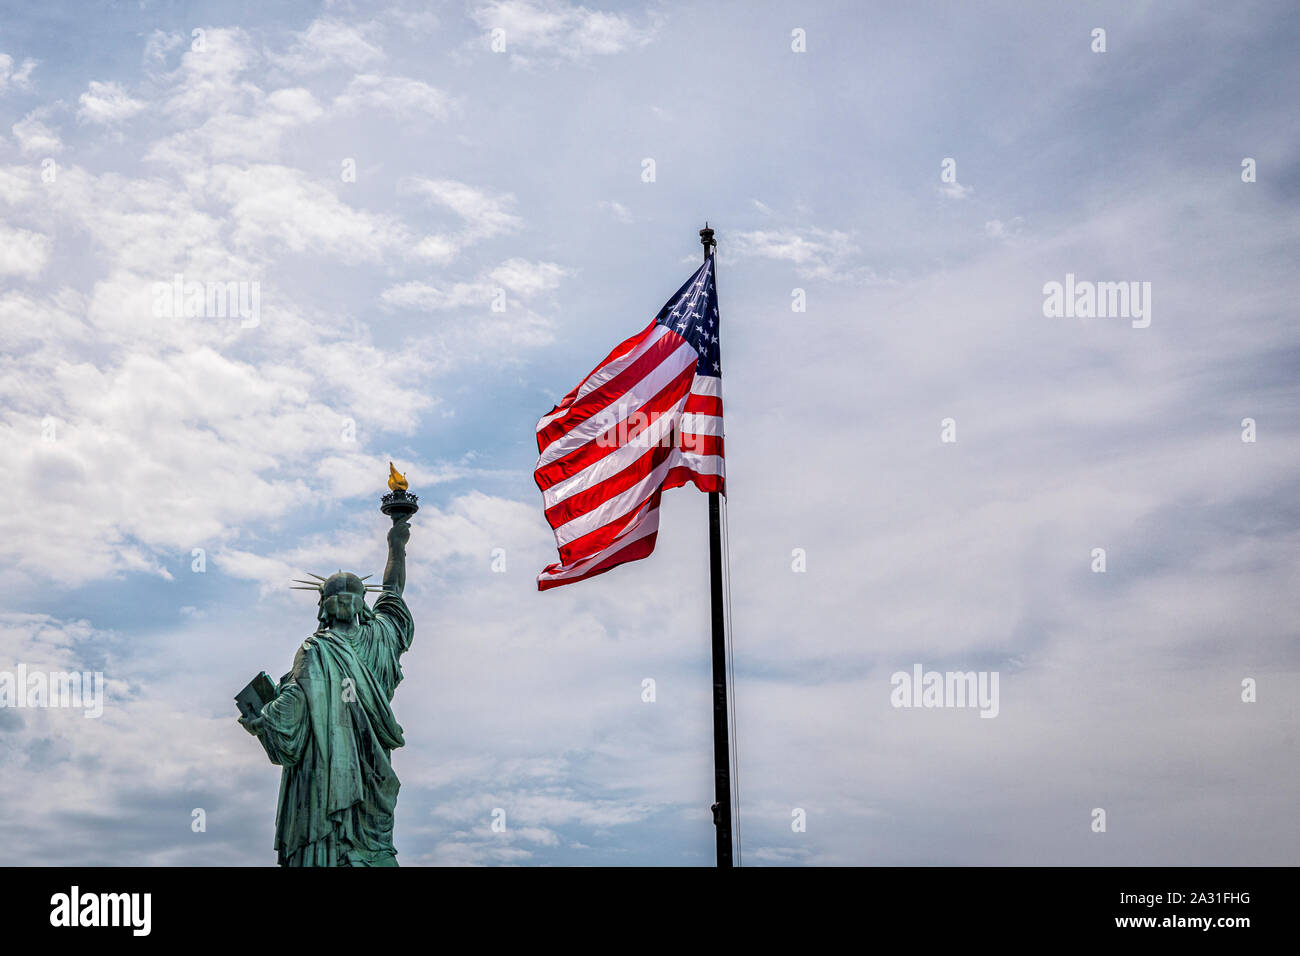 The Statue of Liberty and the US flag, New York City, USA. Stock Photo